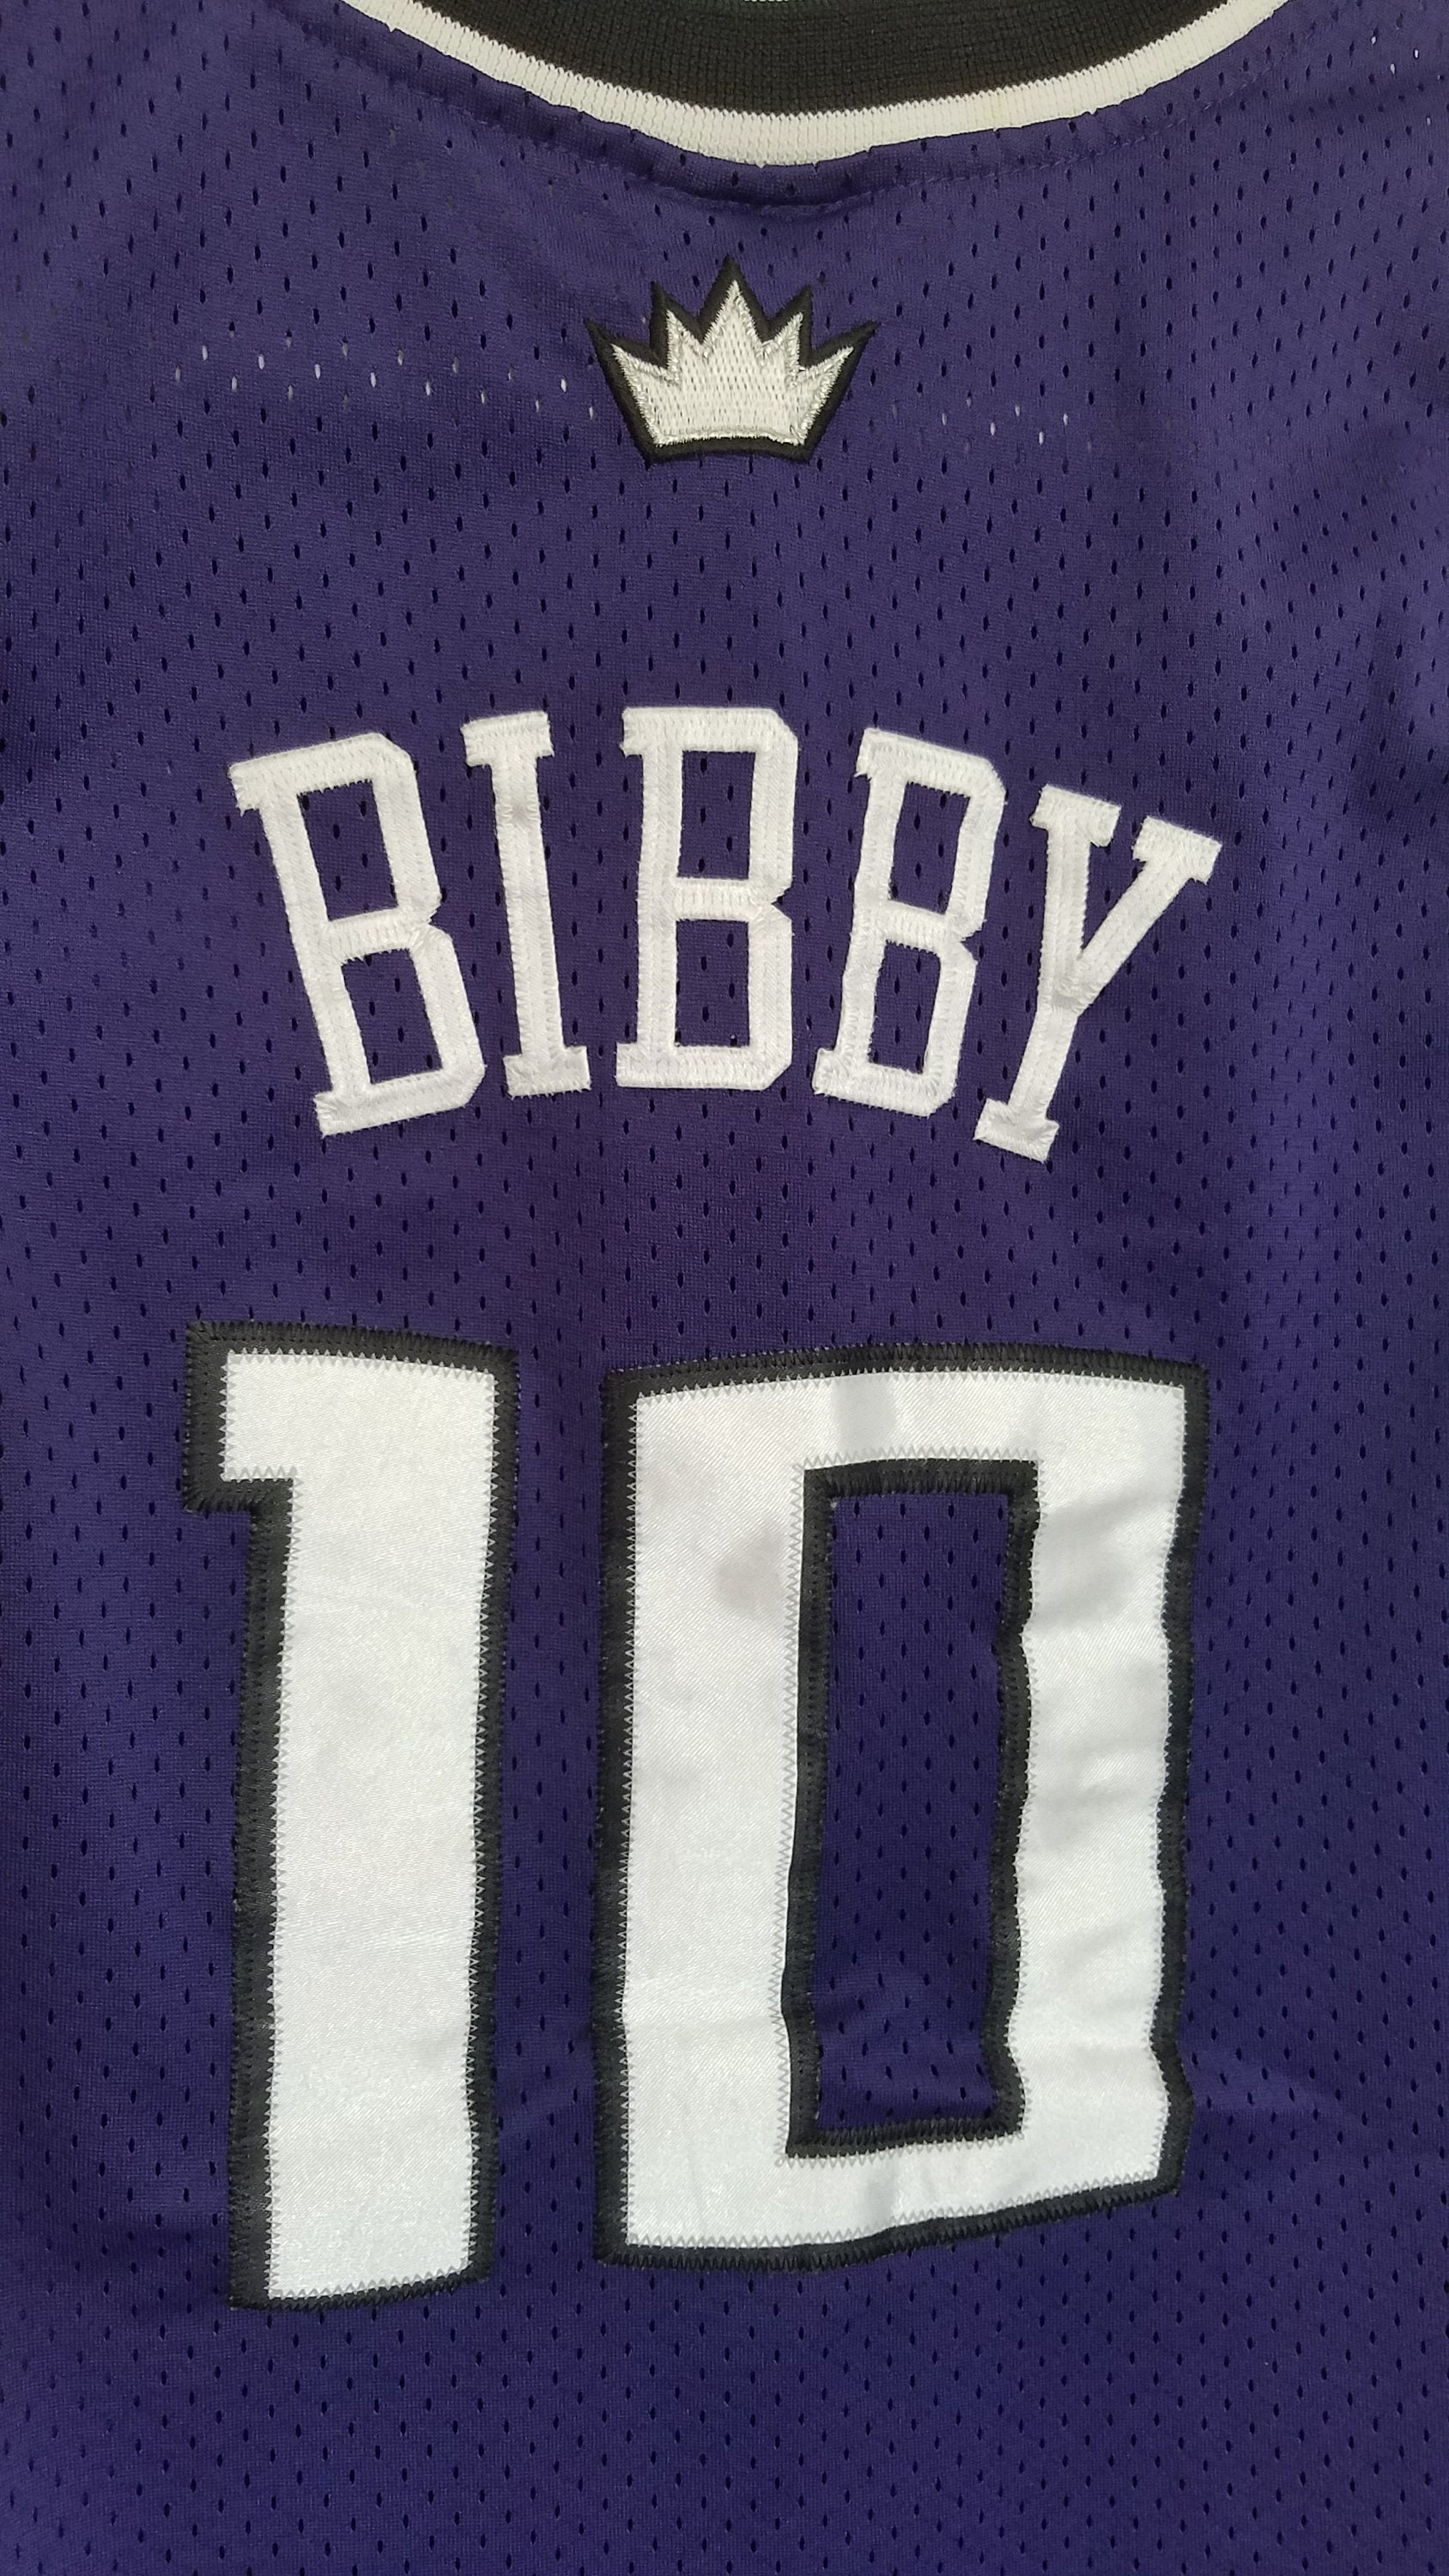 100% Authentic Mike Bibby Vintage Adidas Kings Jersey Size S Mens